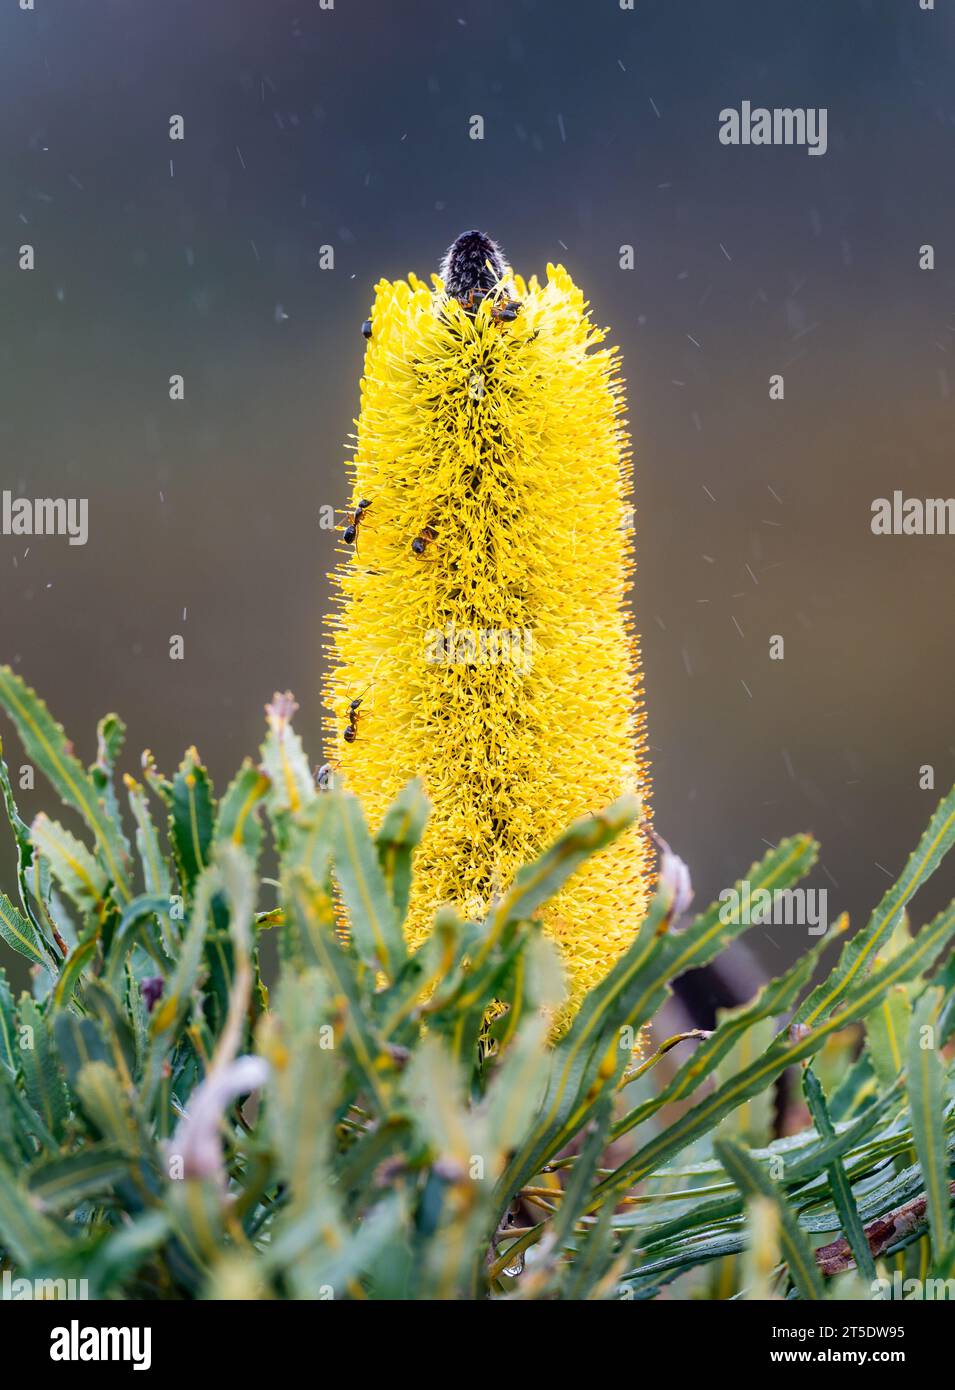 Yellow flowers of Candlestick Banksia (Banksia attenuata) attract ants and other insects. Australia. Stock Photo